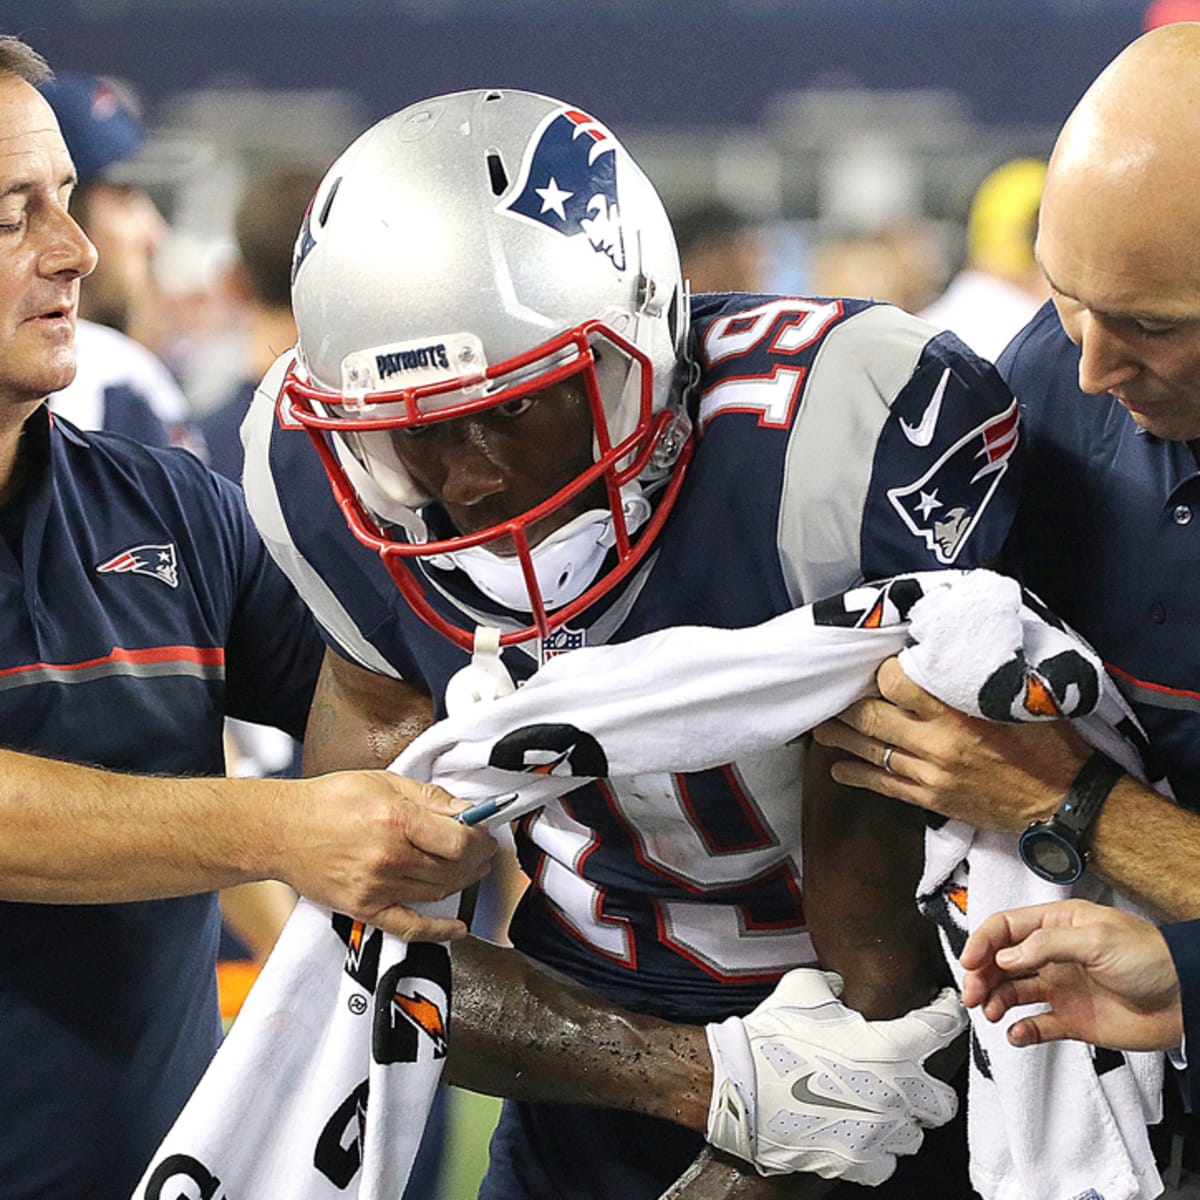 Malcolm Mitchell injury: Patriots WR out four weeks - Sports Illustrated